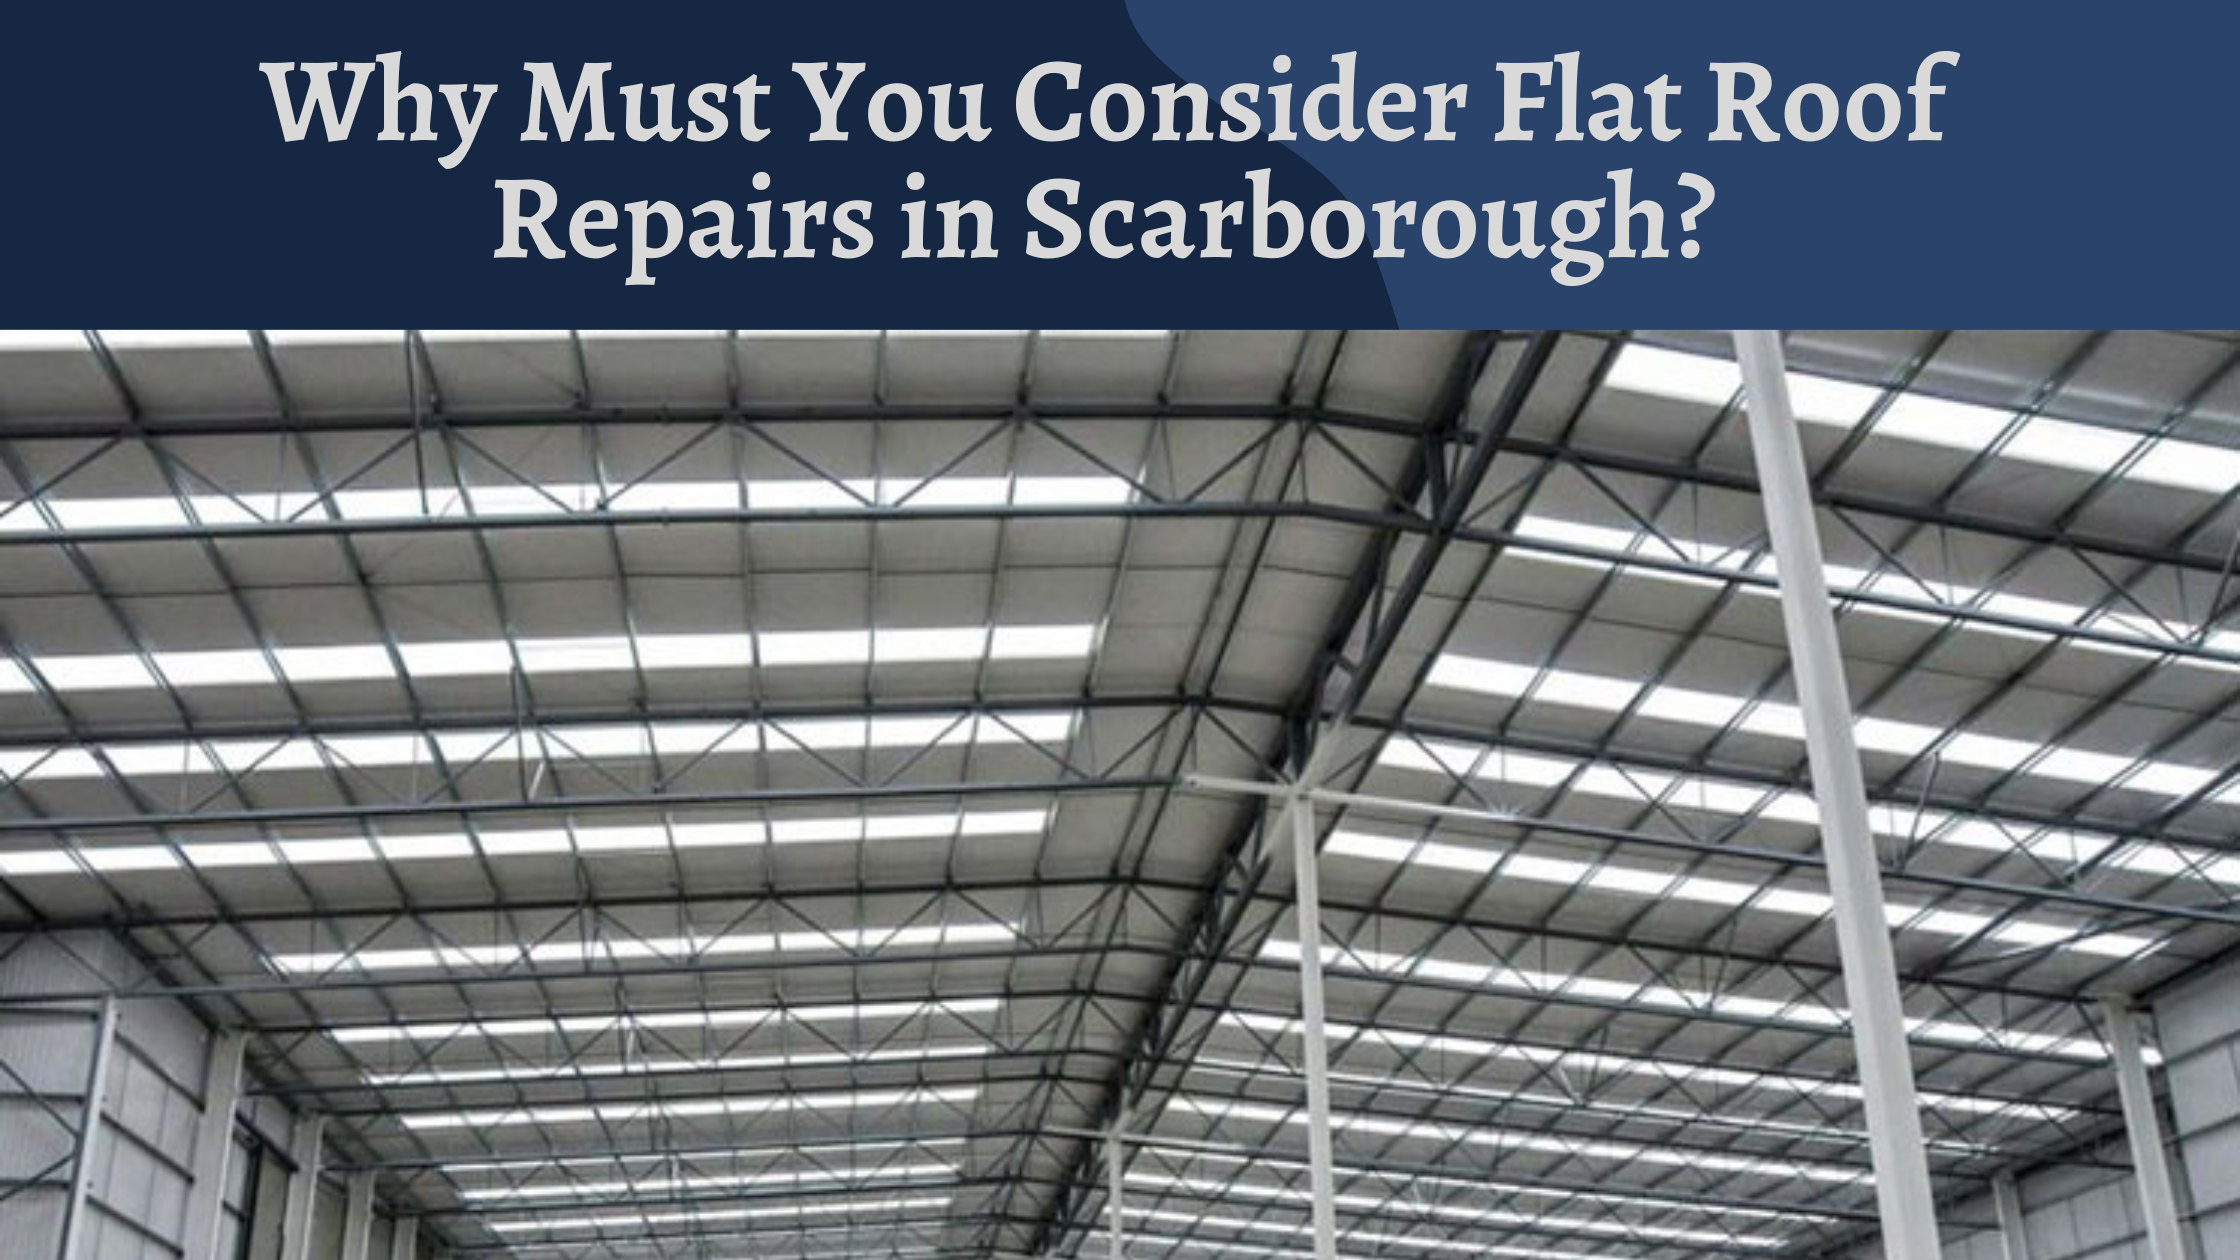 Why Must You Consider Flat Roof Repairs in Scarborough?